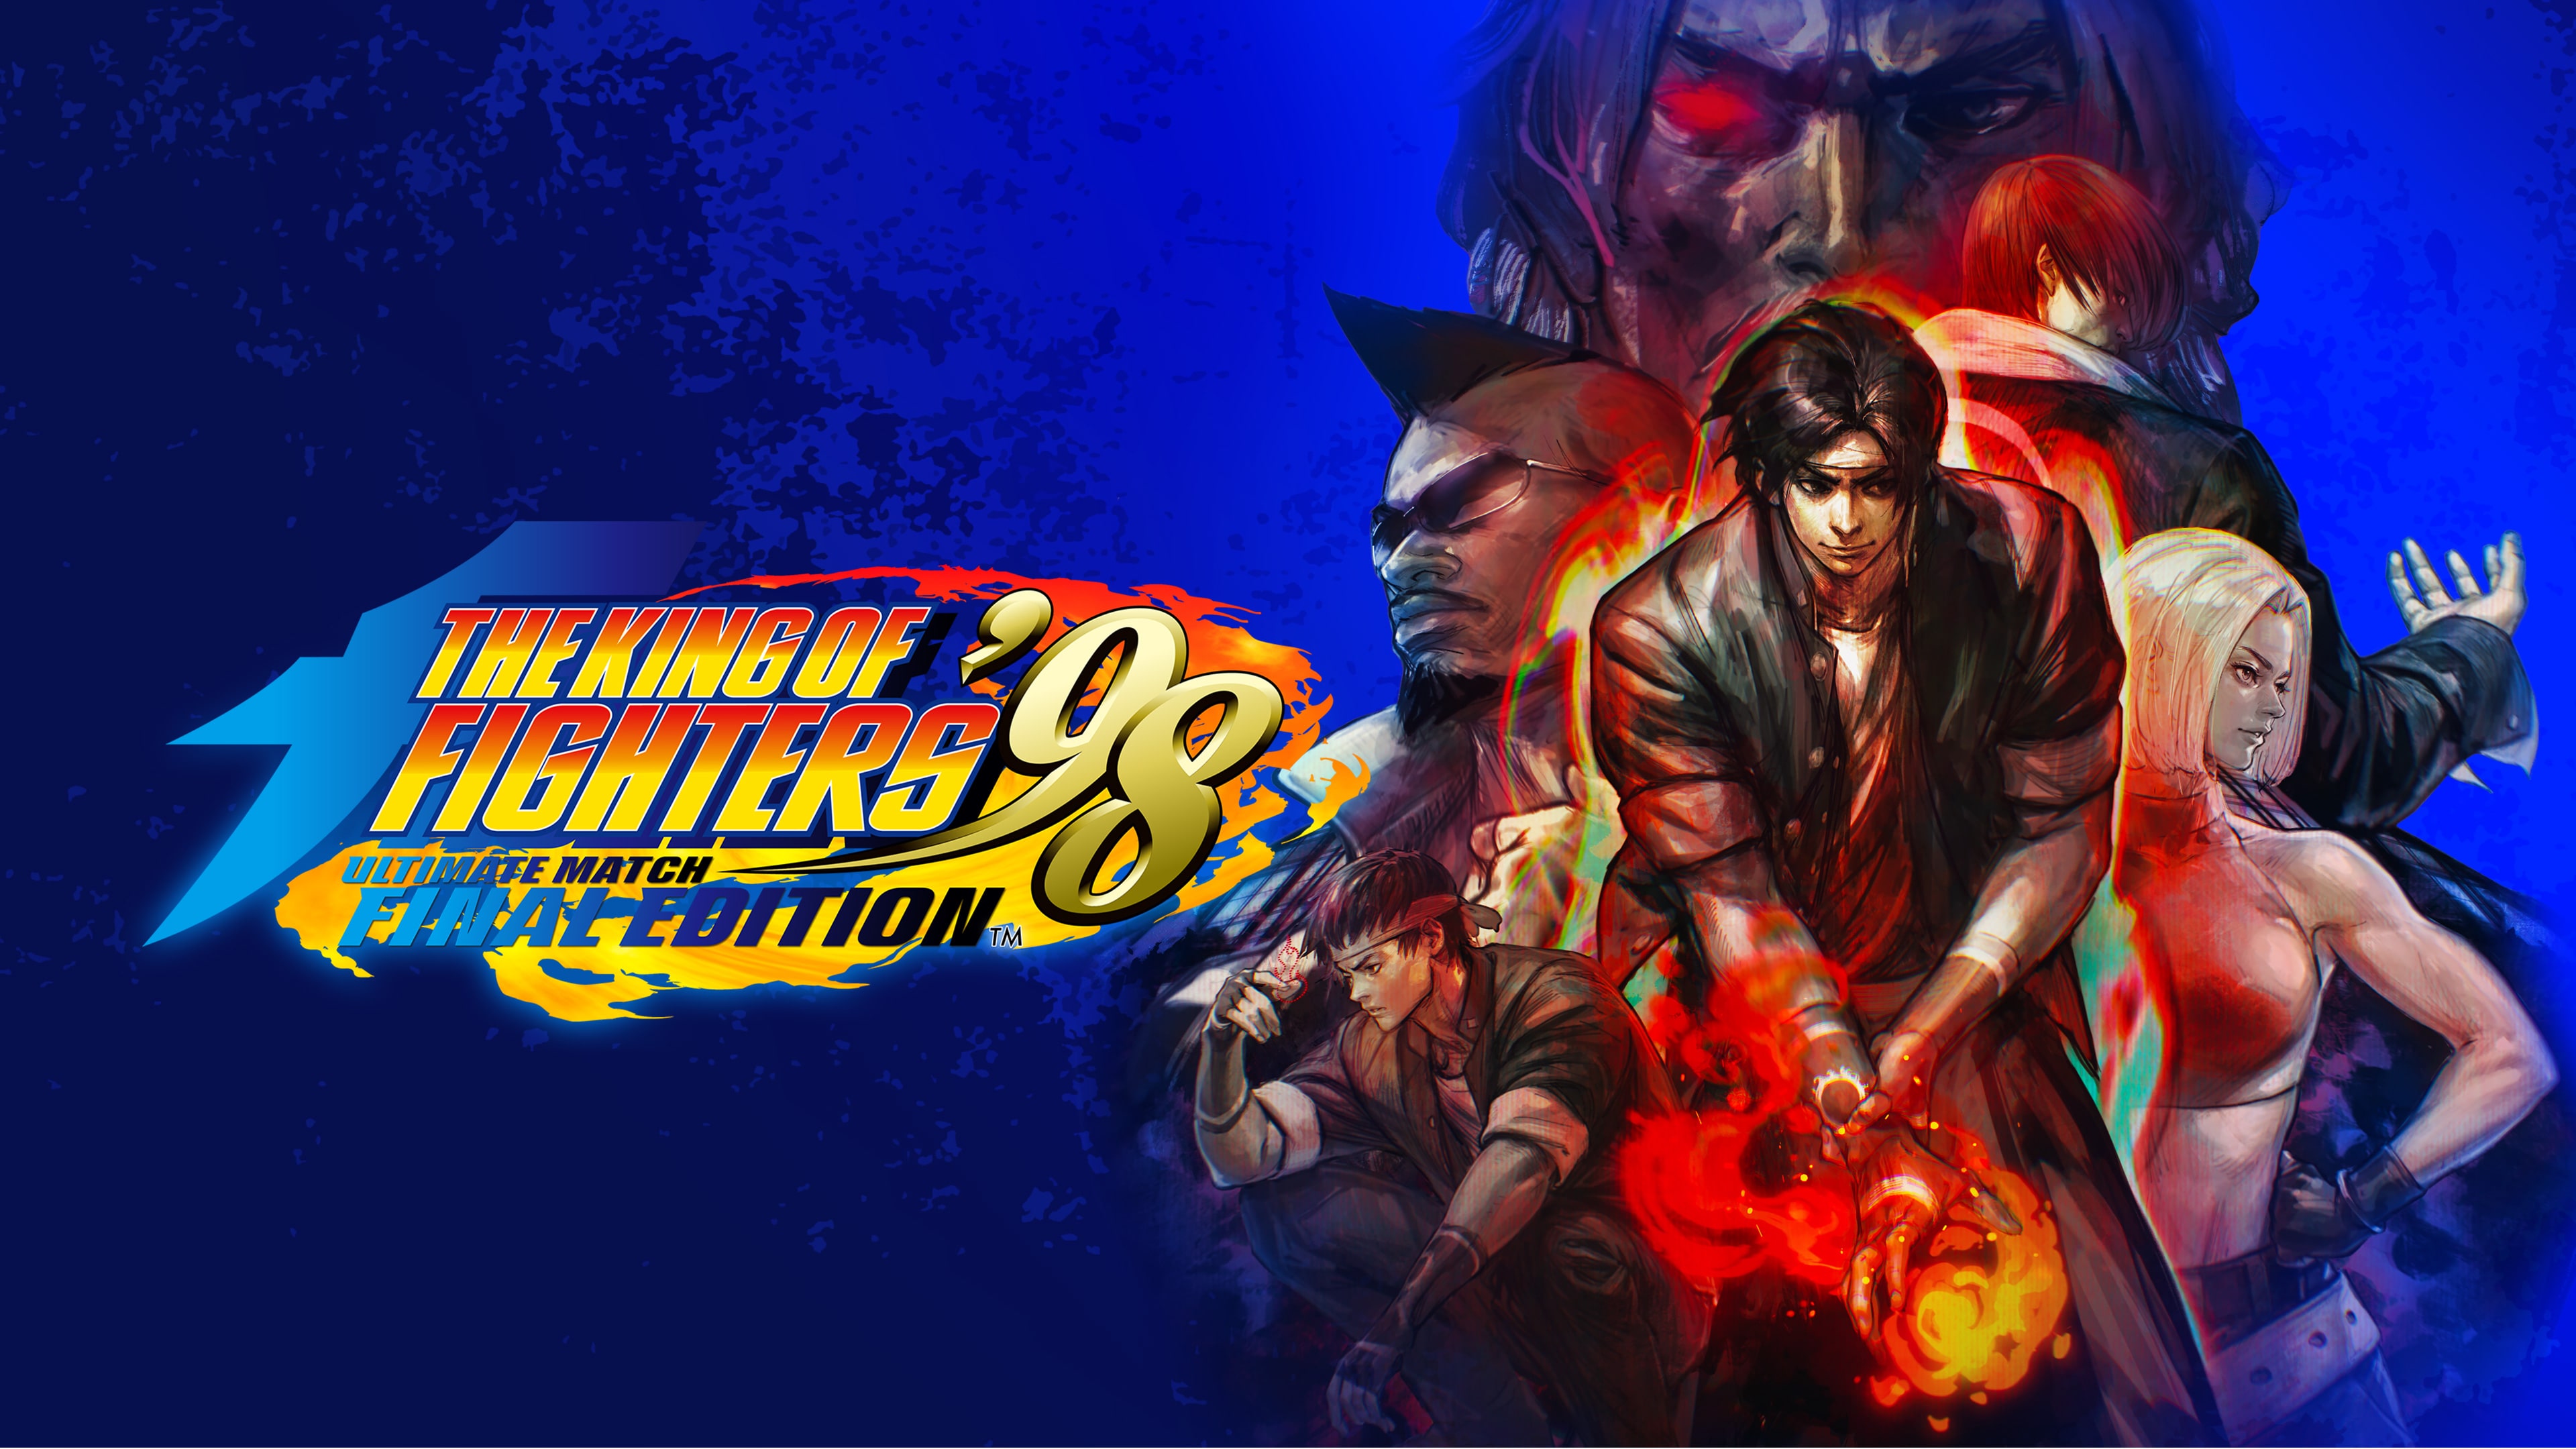 80% THE KING OF FIGHTERS '98 ULTIMATE MATCH FINAL EDITION on